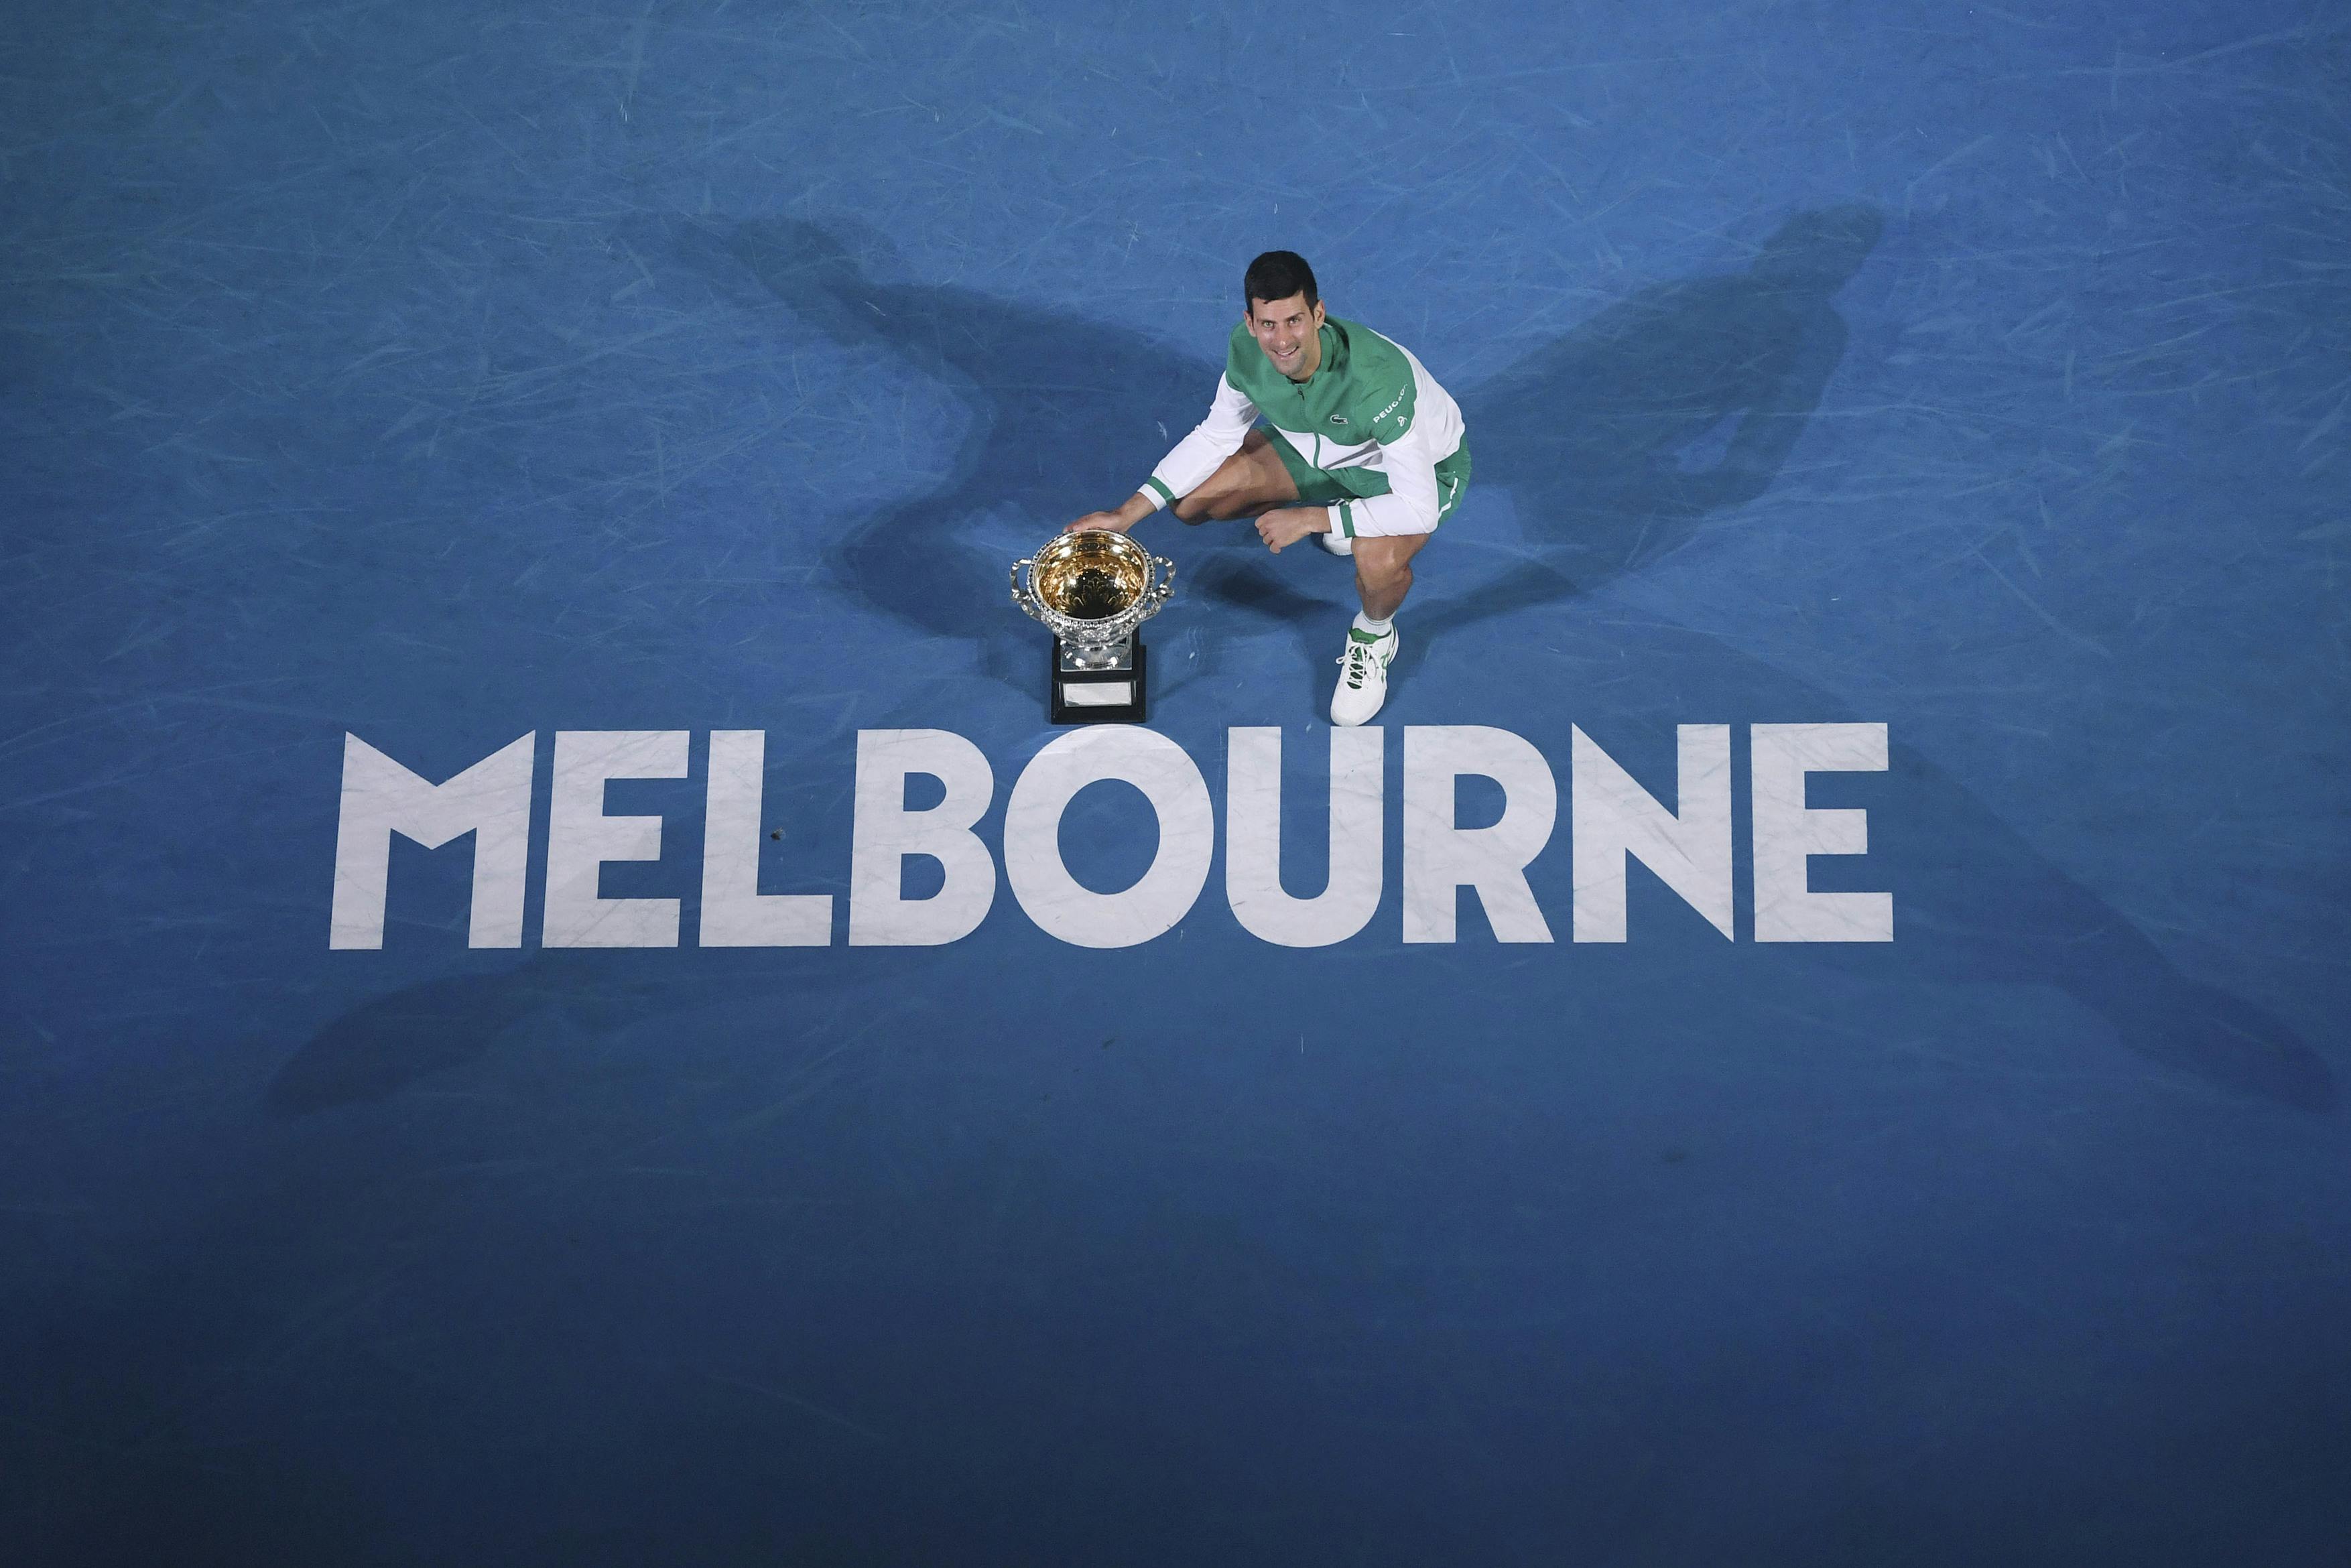 King of Melbourne Djokovic determined to be crowned the greatest RolandGarros The 2023